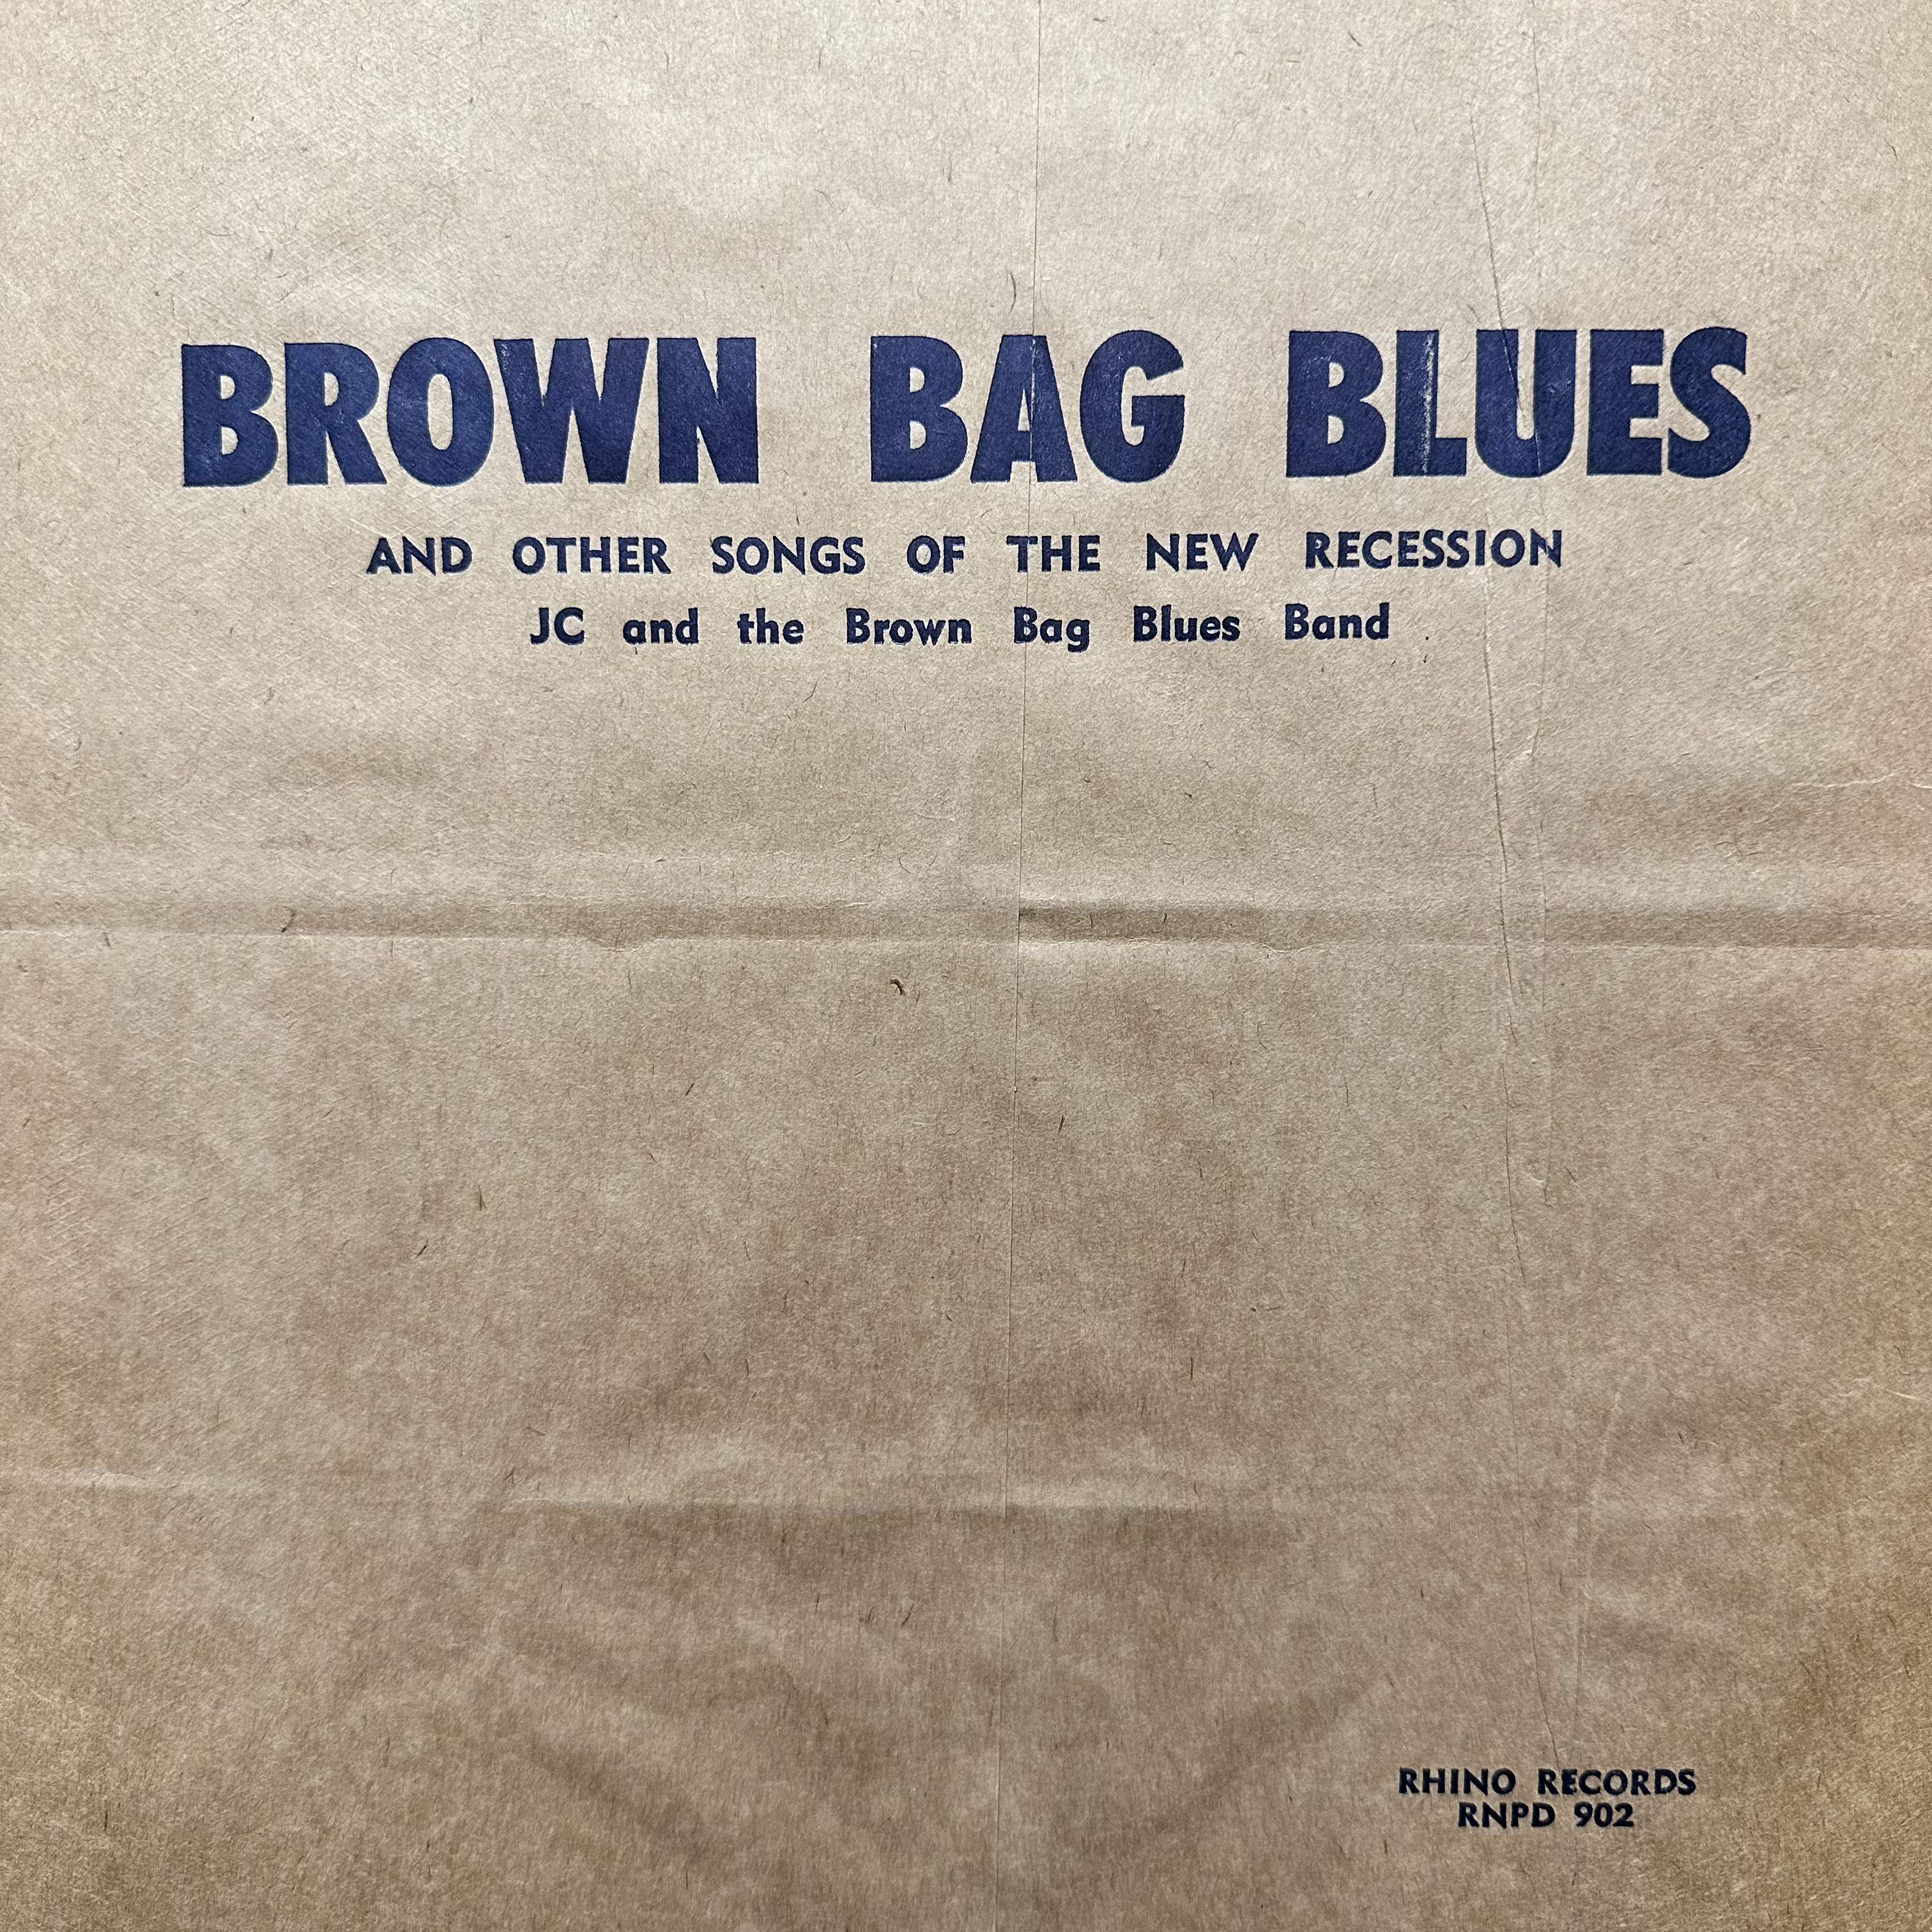 JC And The Brown Bag Blues Band- Brown Bag Blues And Other Songs Of The New Recession